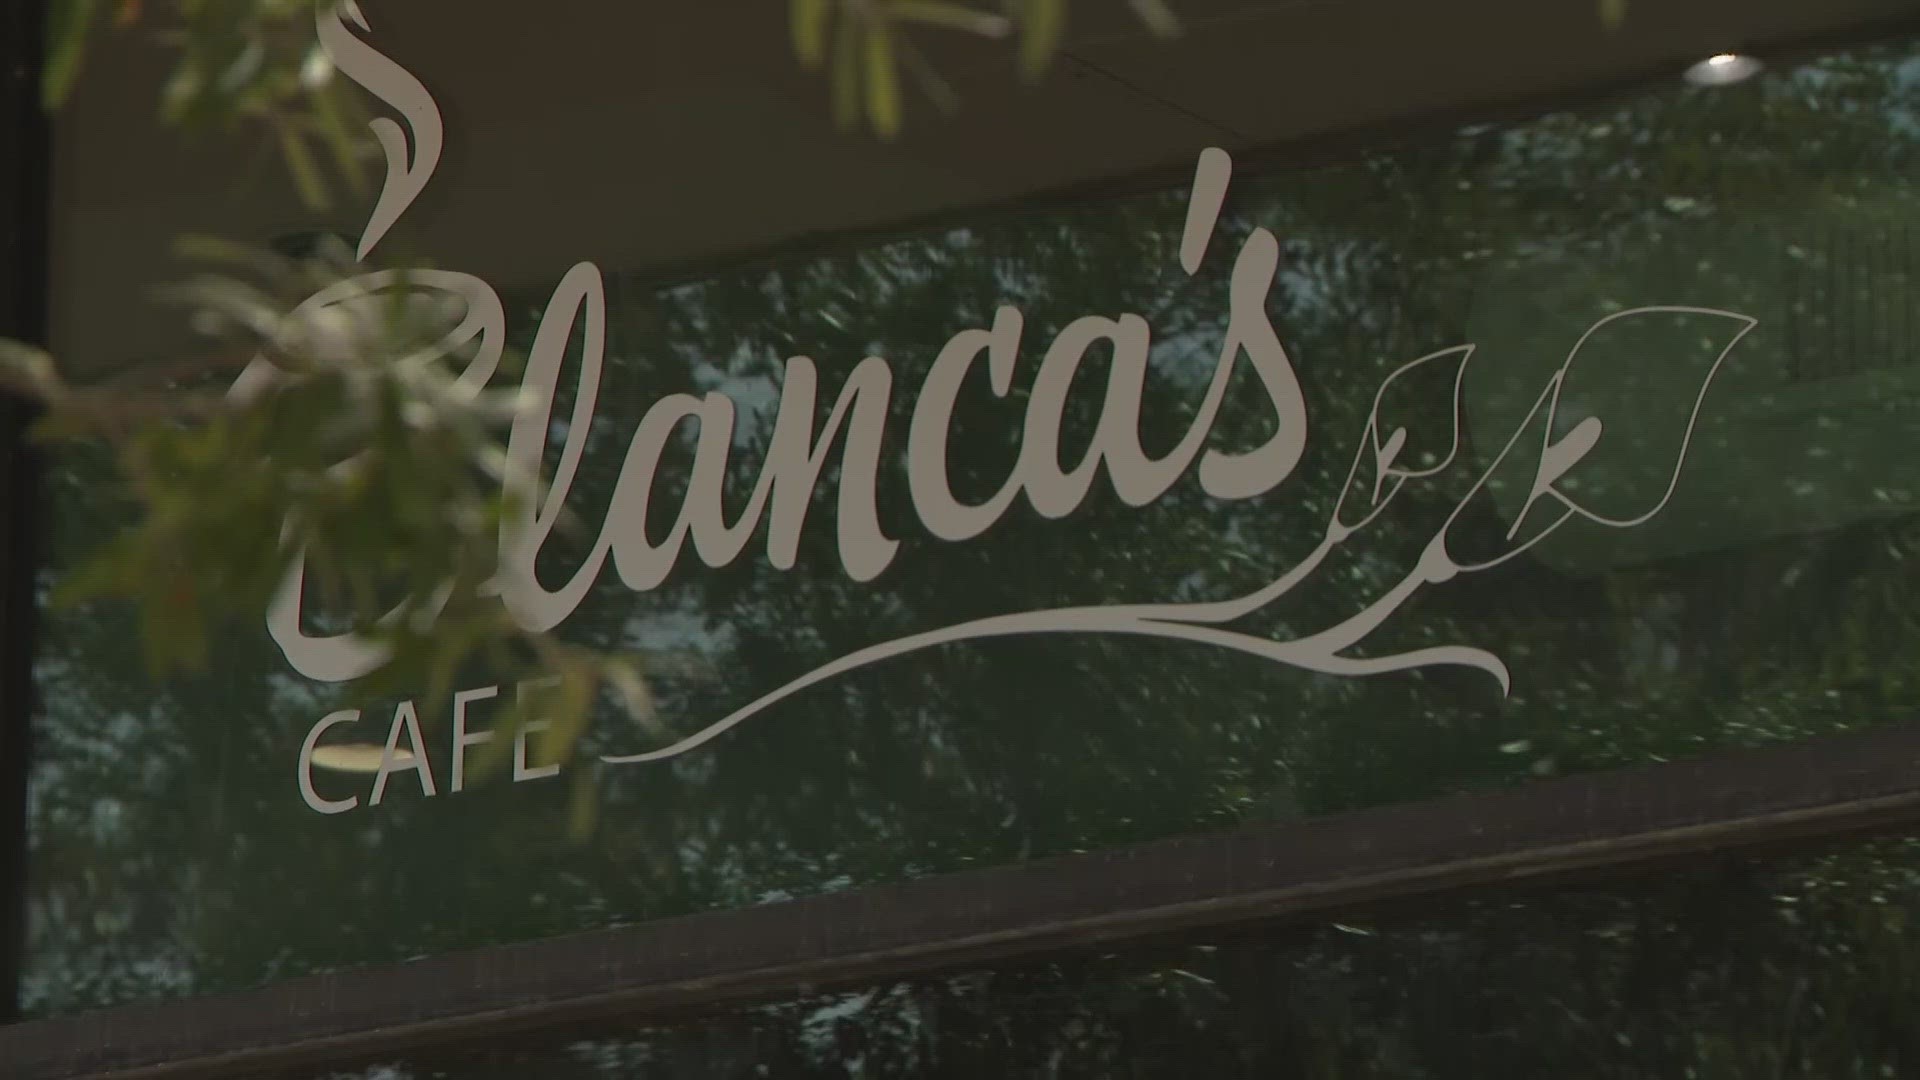 Blanca's Cafe opened up in 2019 on Houston's east side. The business survived the pandemic, and in four years, has become more than just a gathering place.